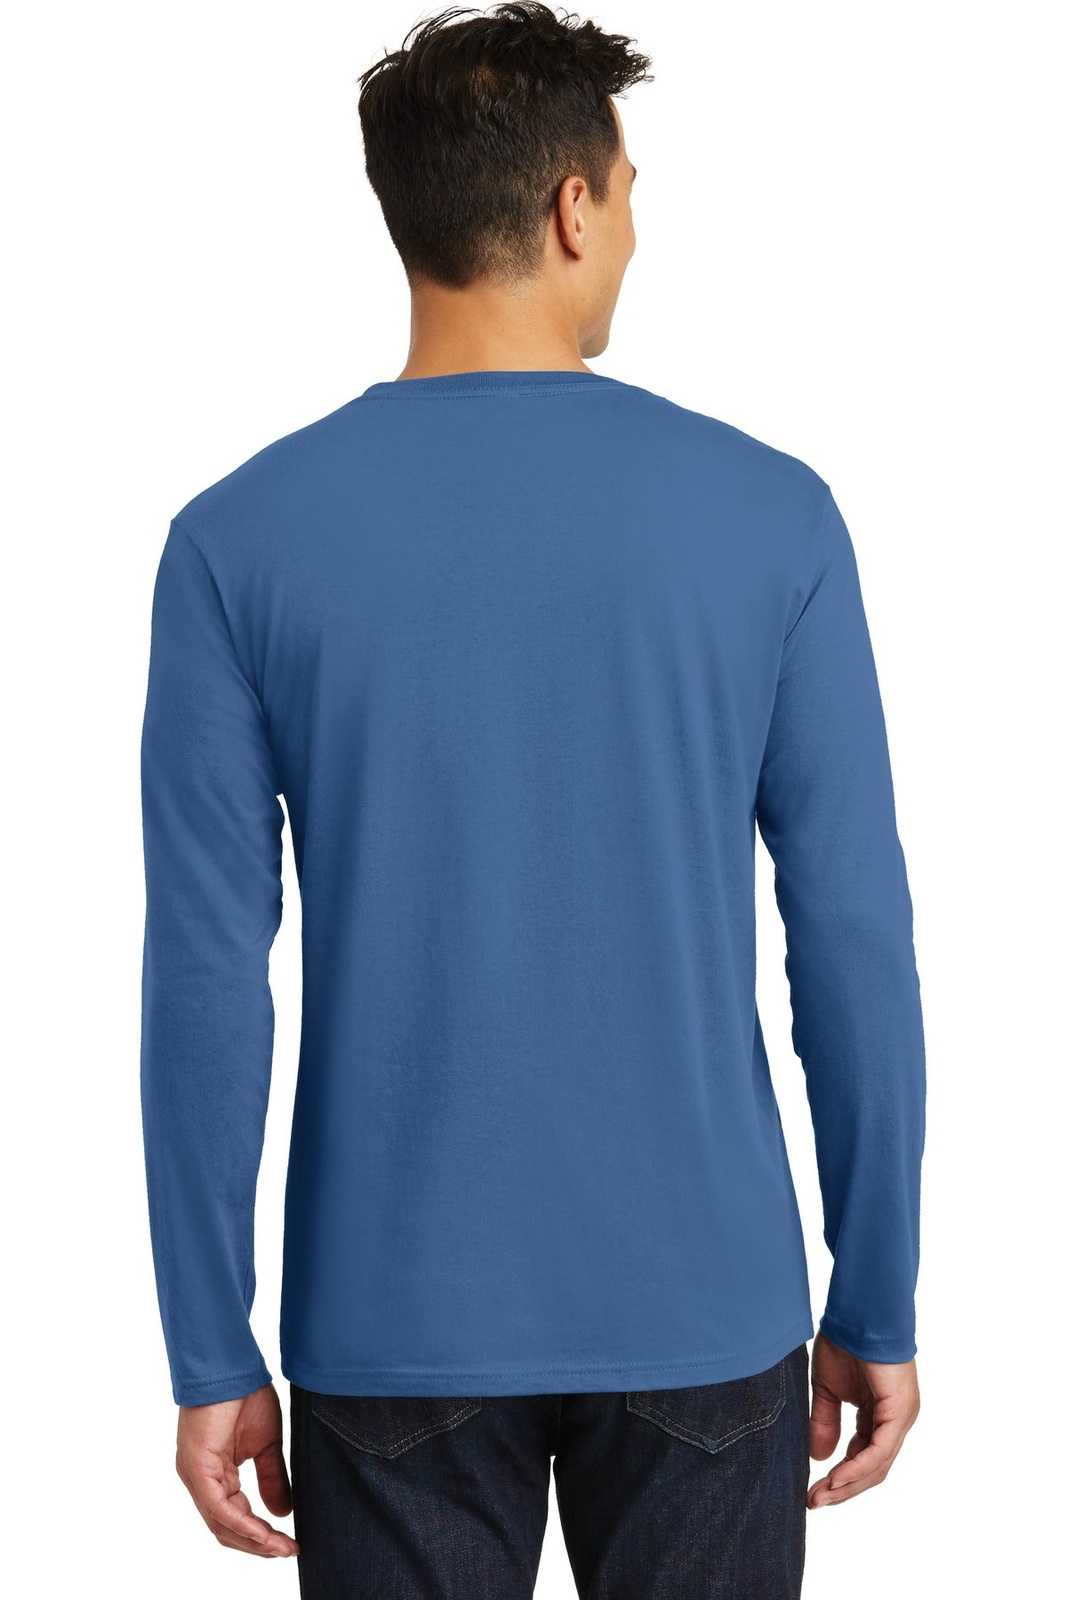 District DT105 Perfect Weight Long Sleeve Tee - Maritime Blue - HIT a Double - 1